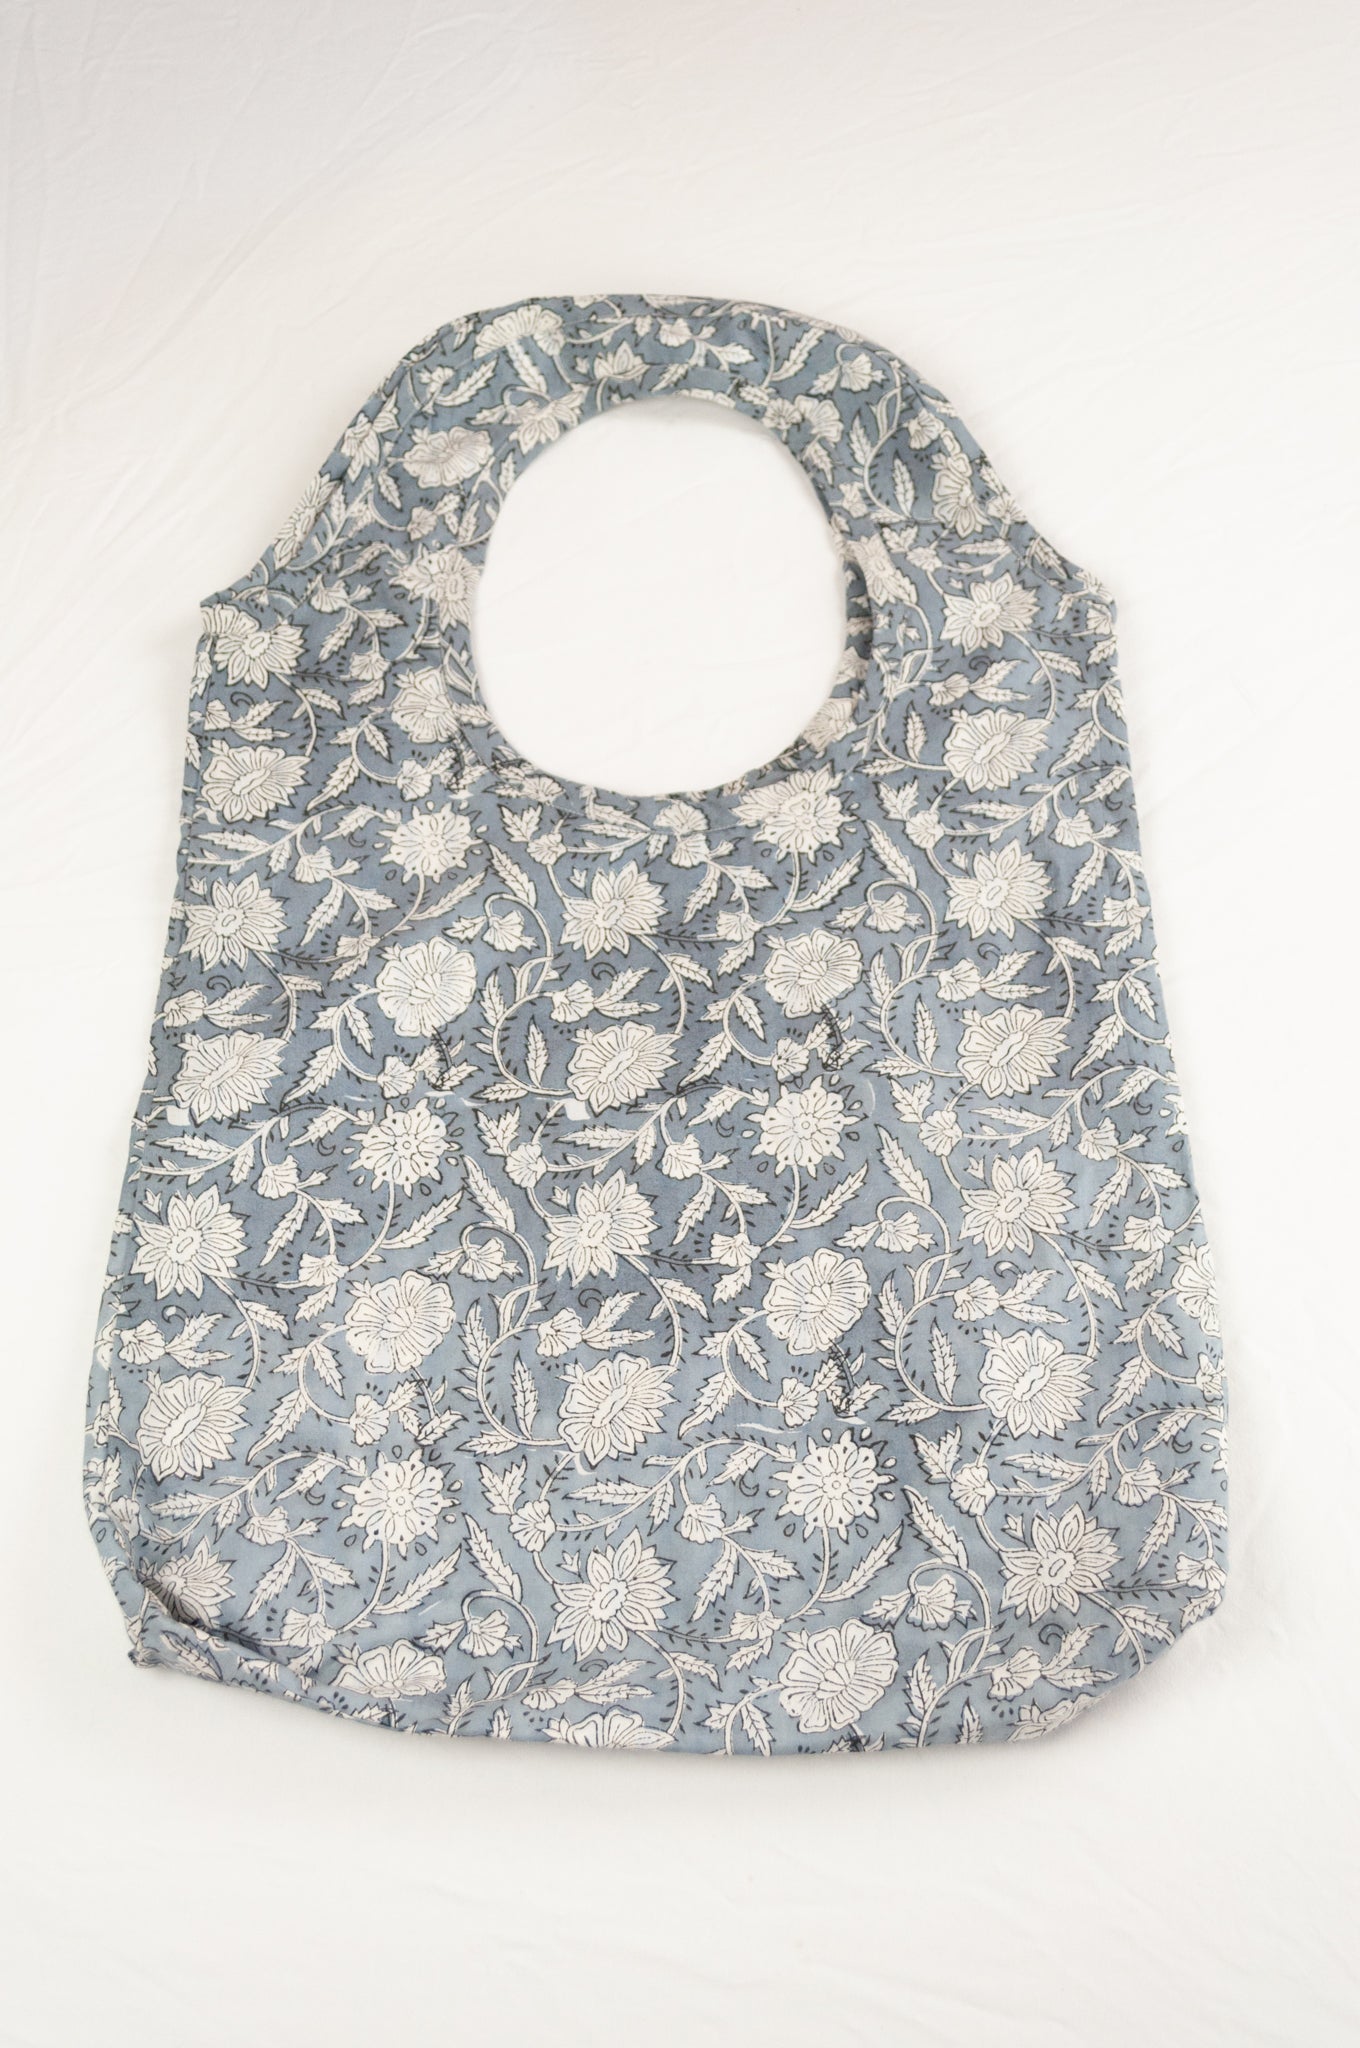 Juniper Hearth block print reusable rollable shopping eco bag, blue grey and white floral pattern.